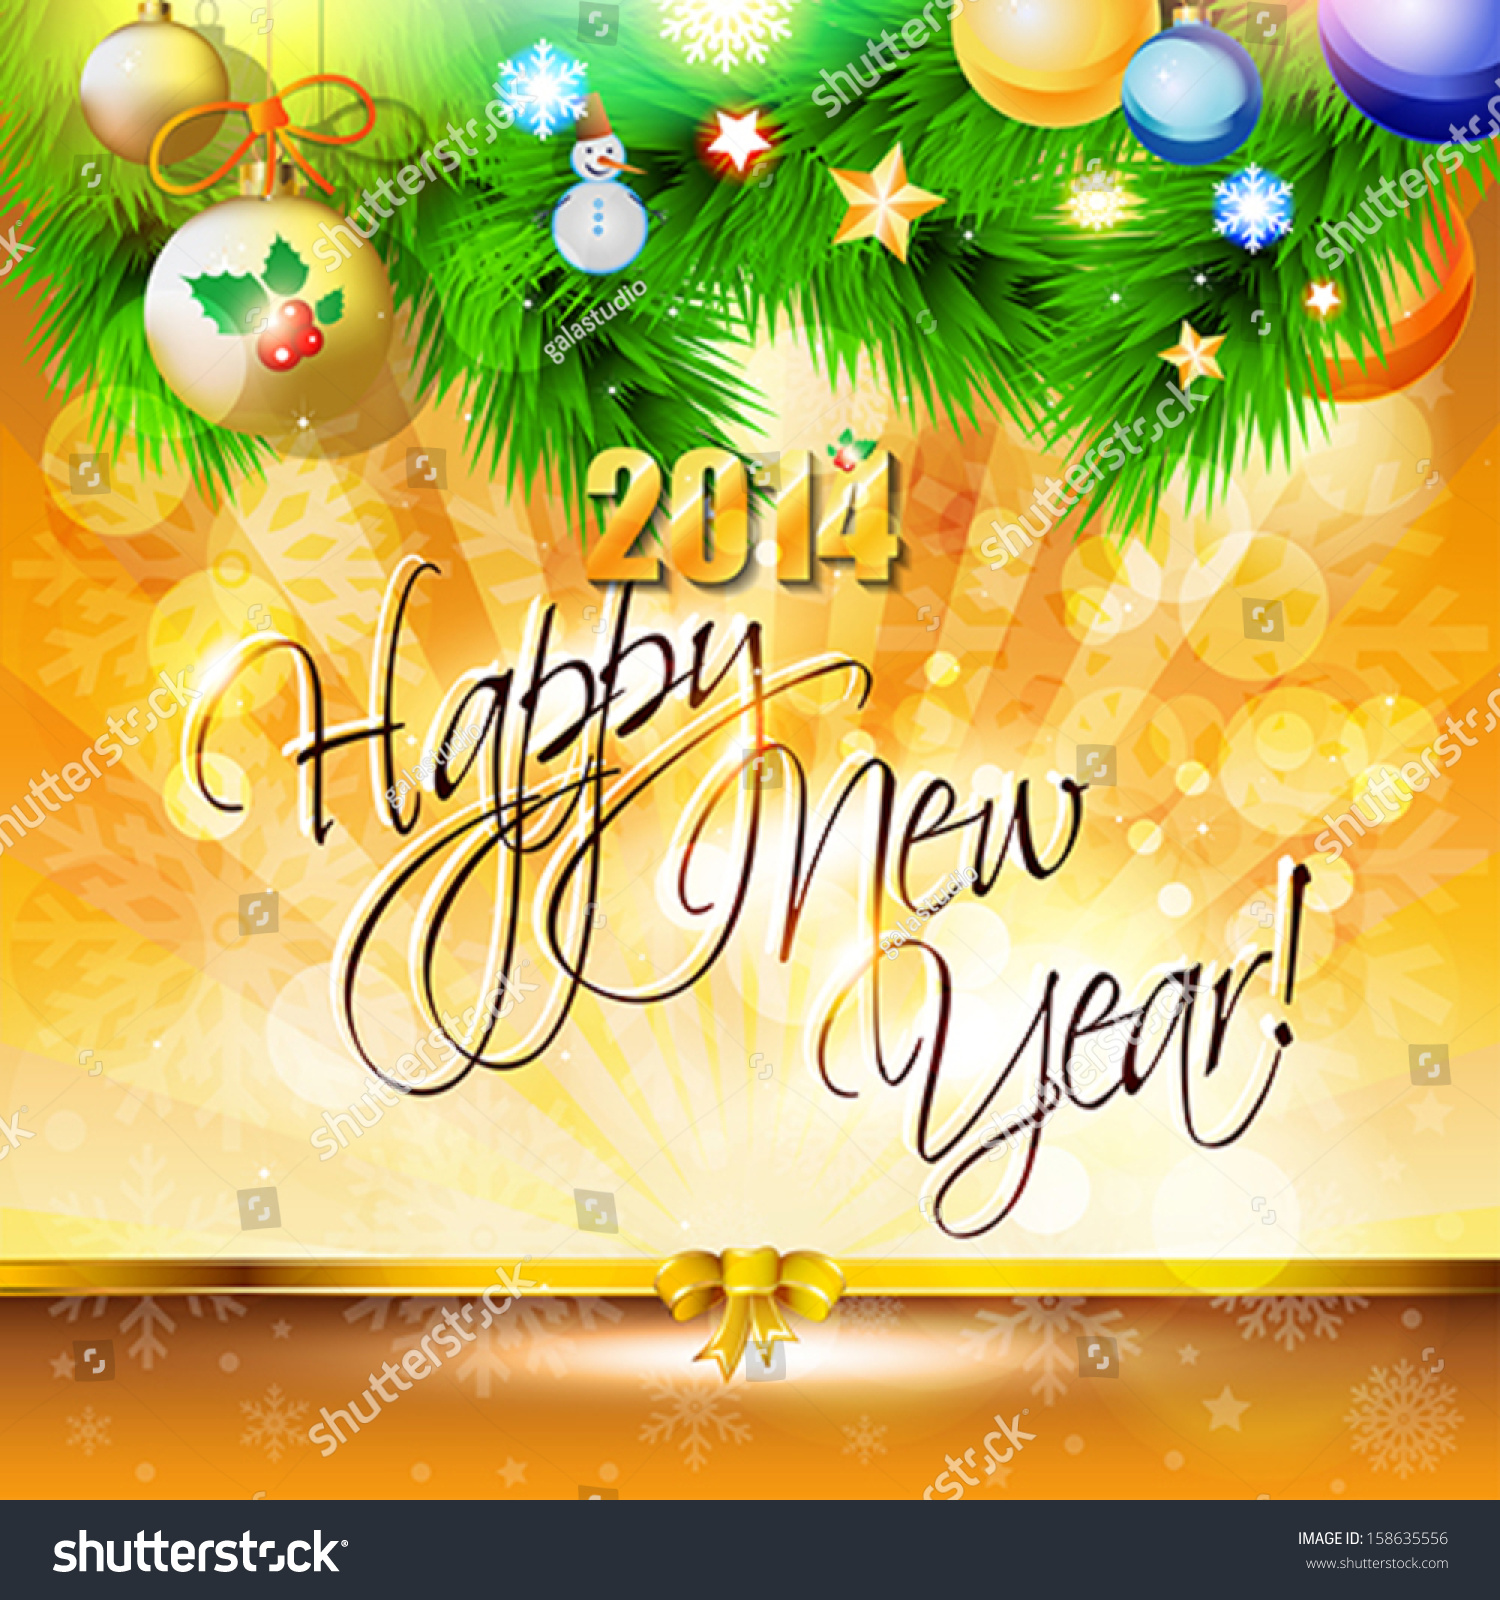 2014 Happy New Year card or background with  ribbons, bows, snowman,  snowflakes, tree, balls, stars.  Vector art. #158635556